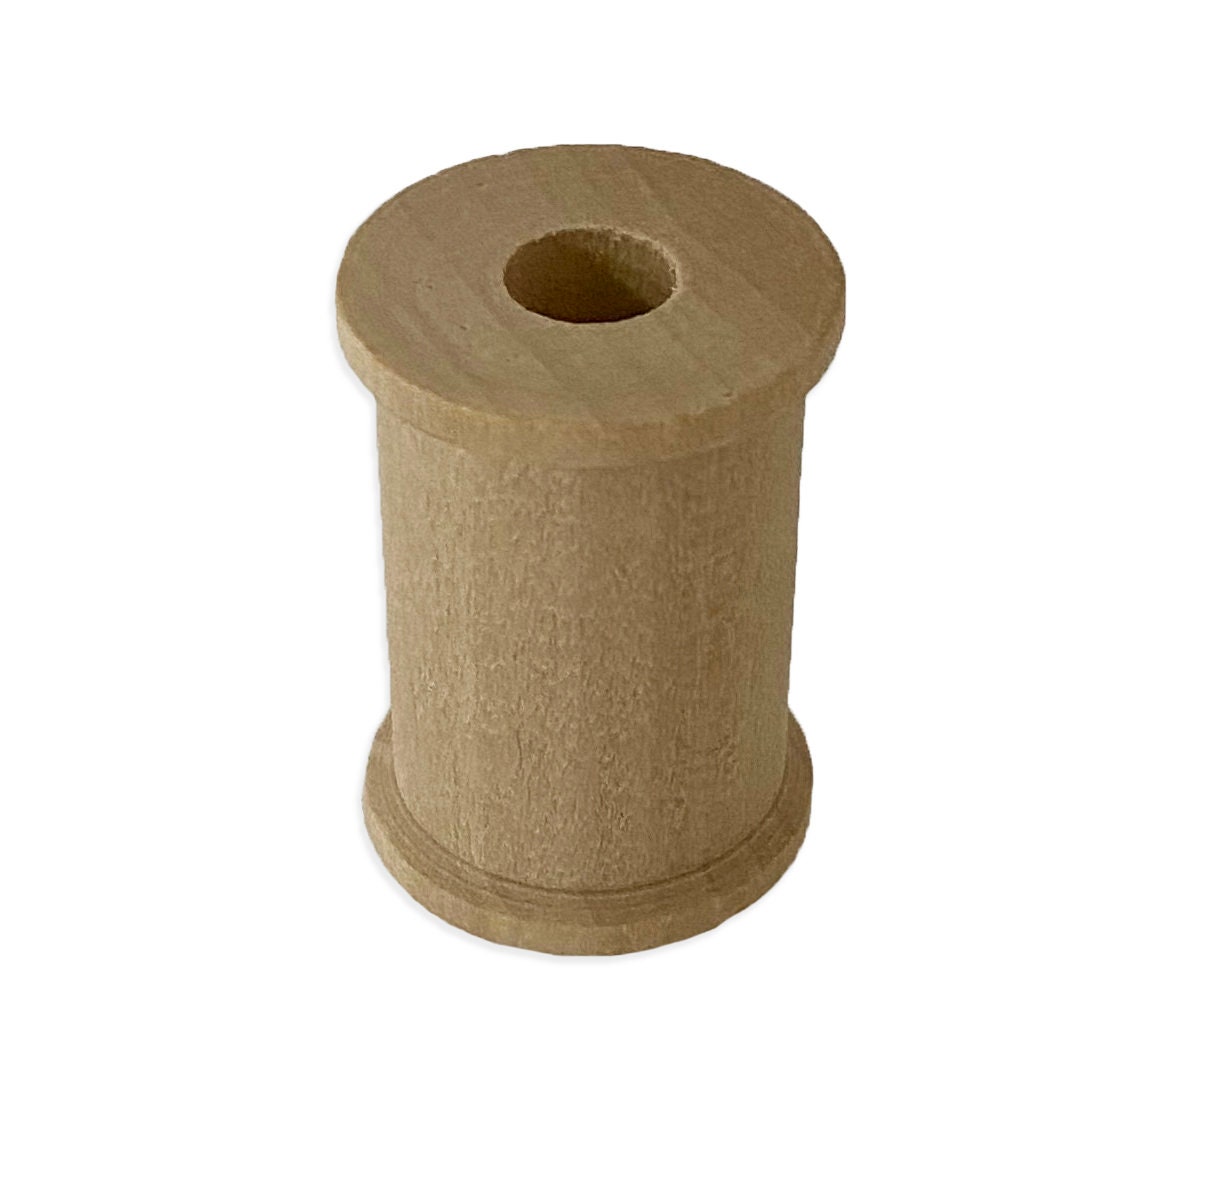 Schacht Cardboard Spools w/ Metal Ends - 4 Inch at WEBS